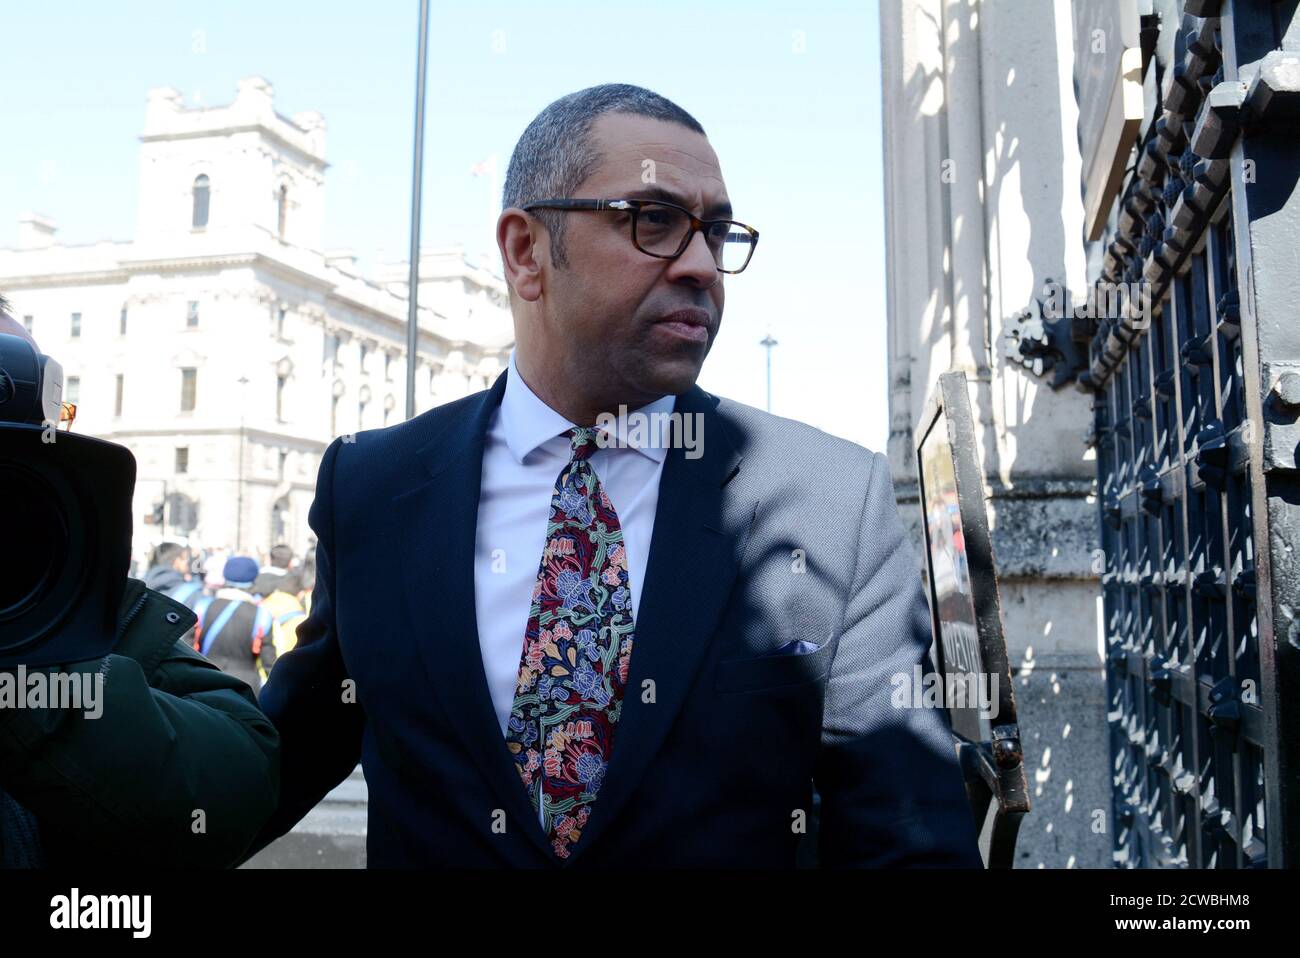 Photograph of James Cleverly. James Spencer Cleverly (1969-) a British Conservative politician serving as Co-Chairman of the Conservative Party alongside Ben Elliot since 2019 and as Member of Parliament for Braintree since 2015. He previously served as Deputy Chairman of the Conservative Party from 2018 to 2019 Stock Photo